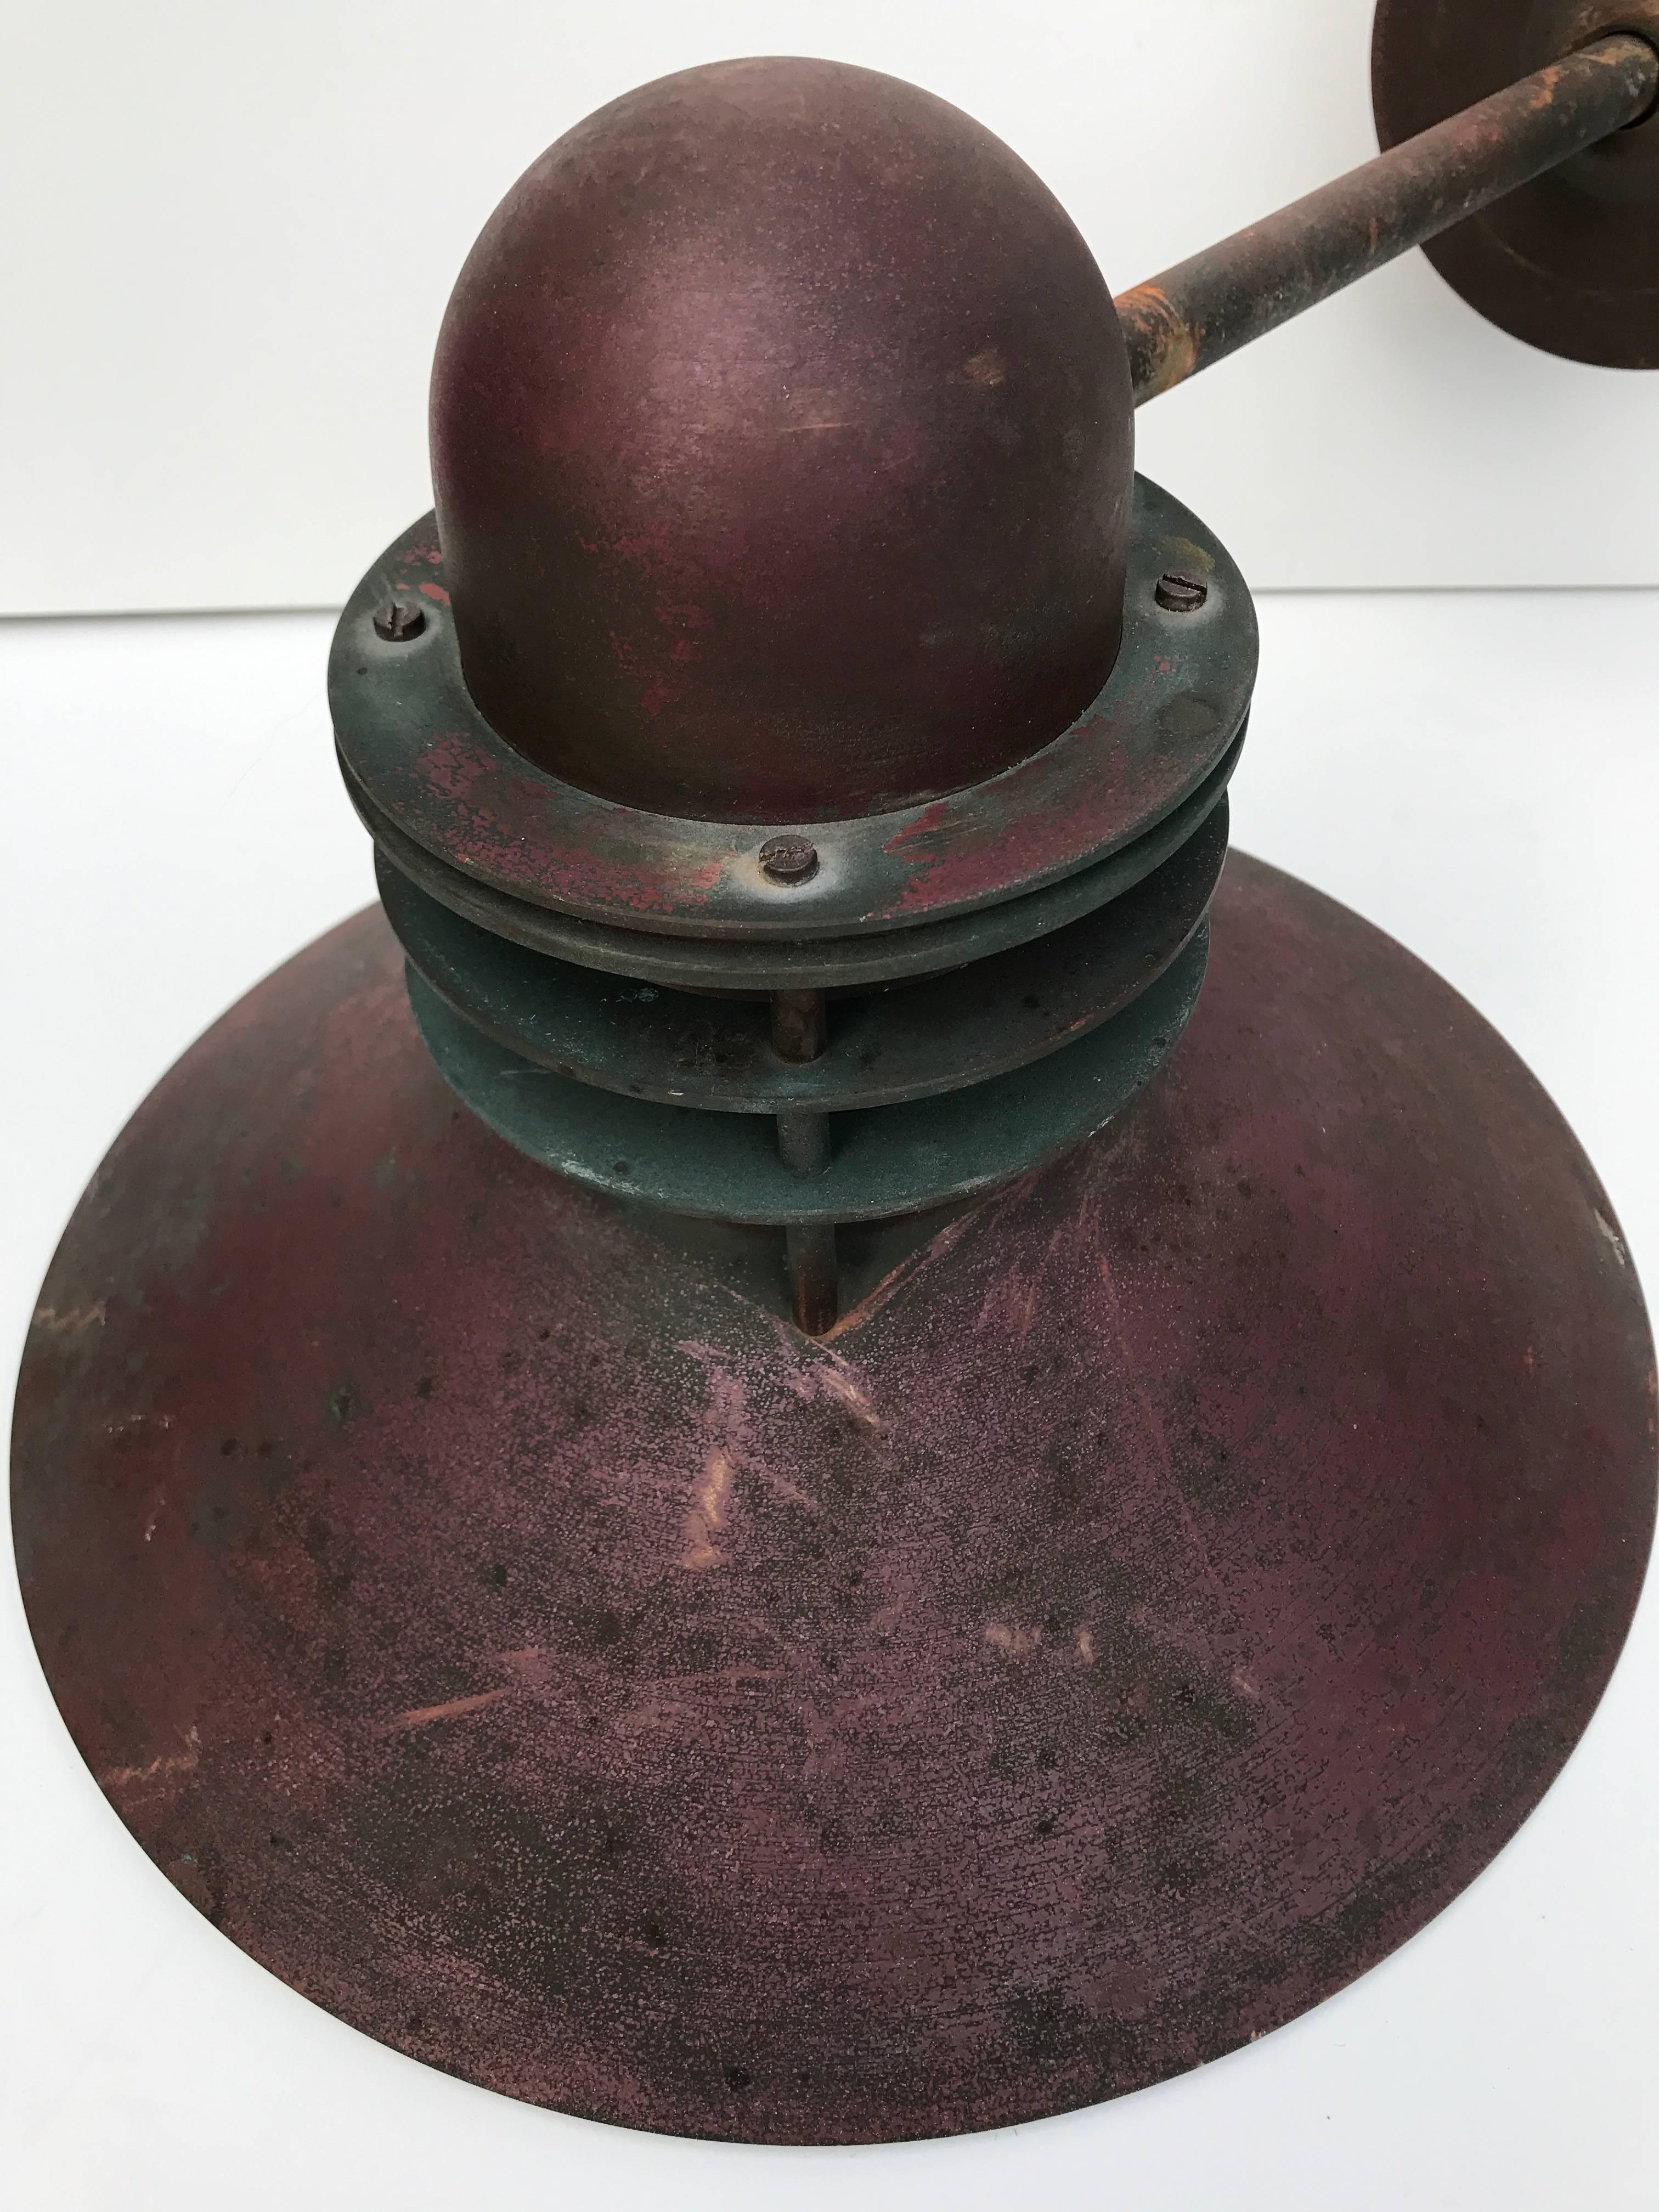 Late 20th century, pair of Louis Poulsen copper outdoor nyhavn wall lamps.
Beautifully aged and patinated copper with a red tone and green copper oxide tone. This pair is most likely made in the late part of the 20th century they are in a fantastic